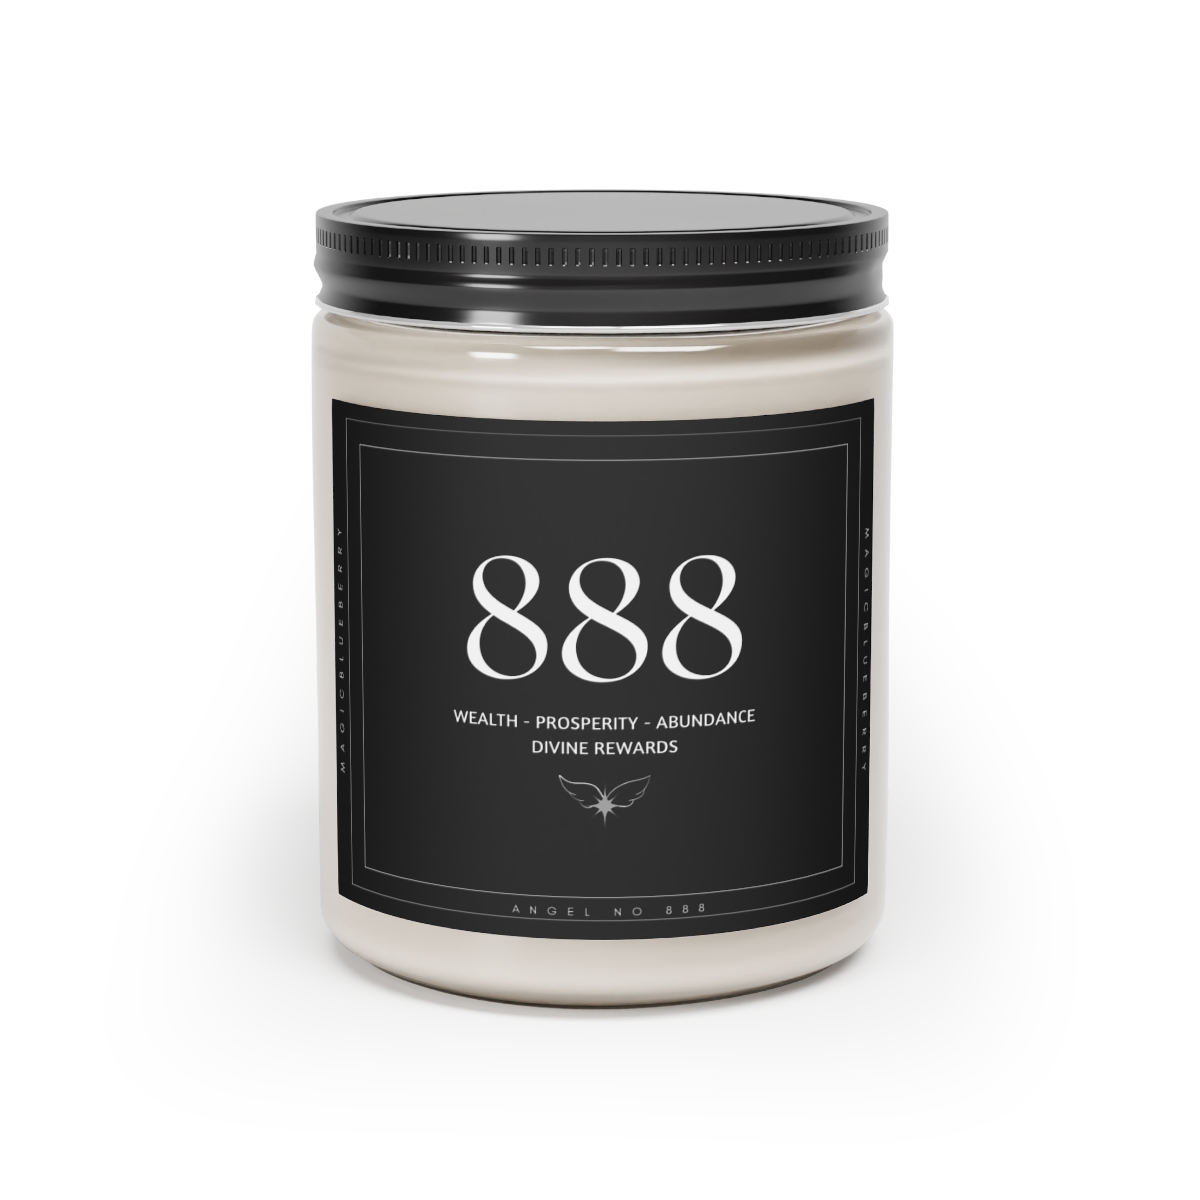 Angel Spell 888 - Scented Vegan Soy Wax Candles, Clear Jar Candle, Spell Candles, Sassy Candle, Vegan Candle, Cotton Wick Candle  product thumbnail image